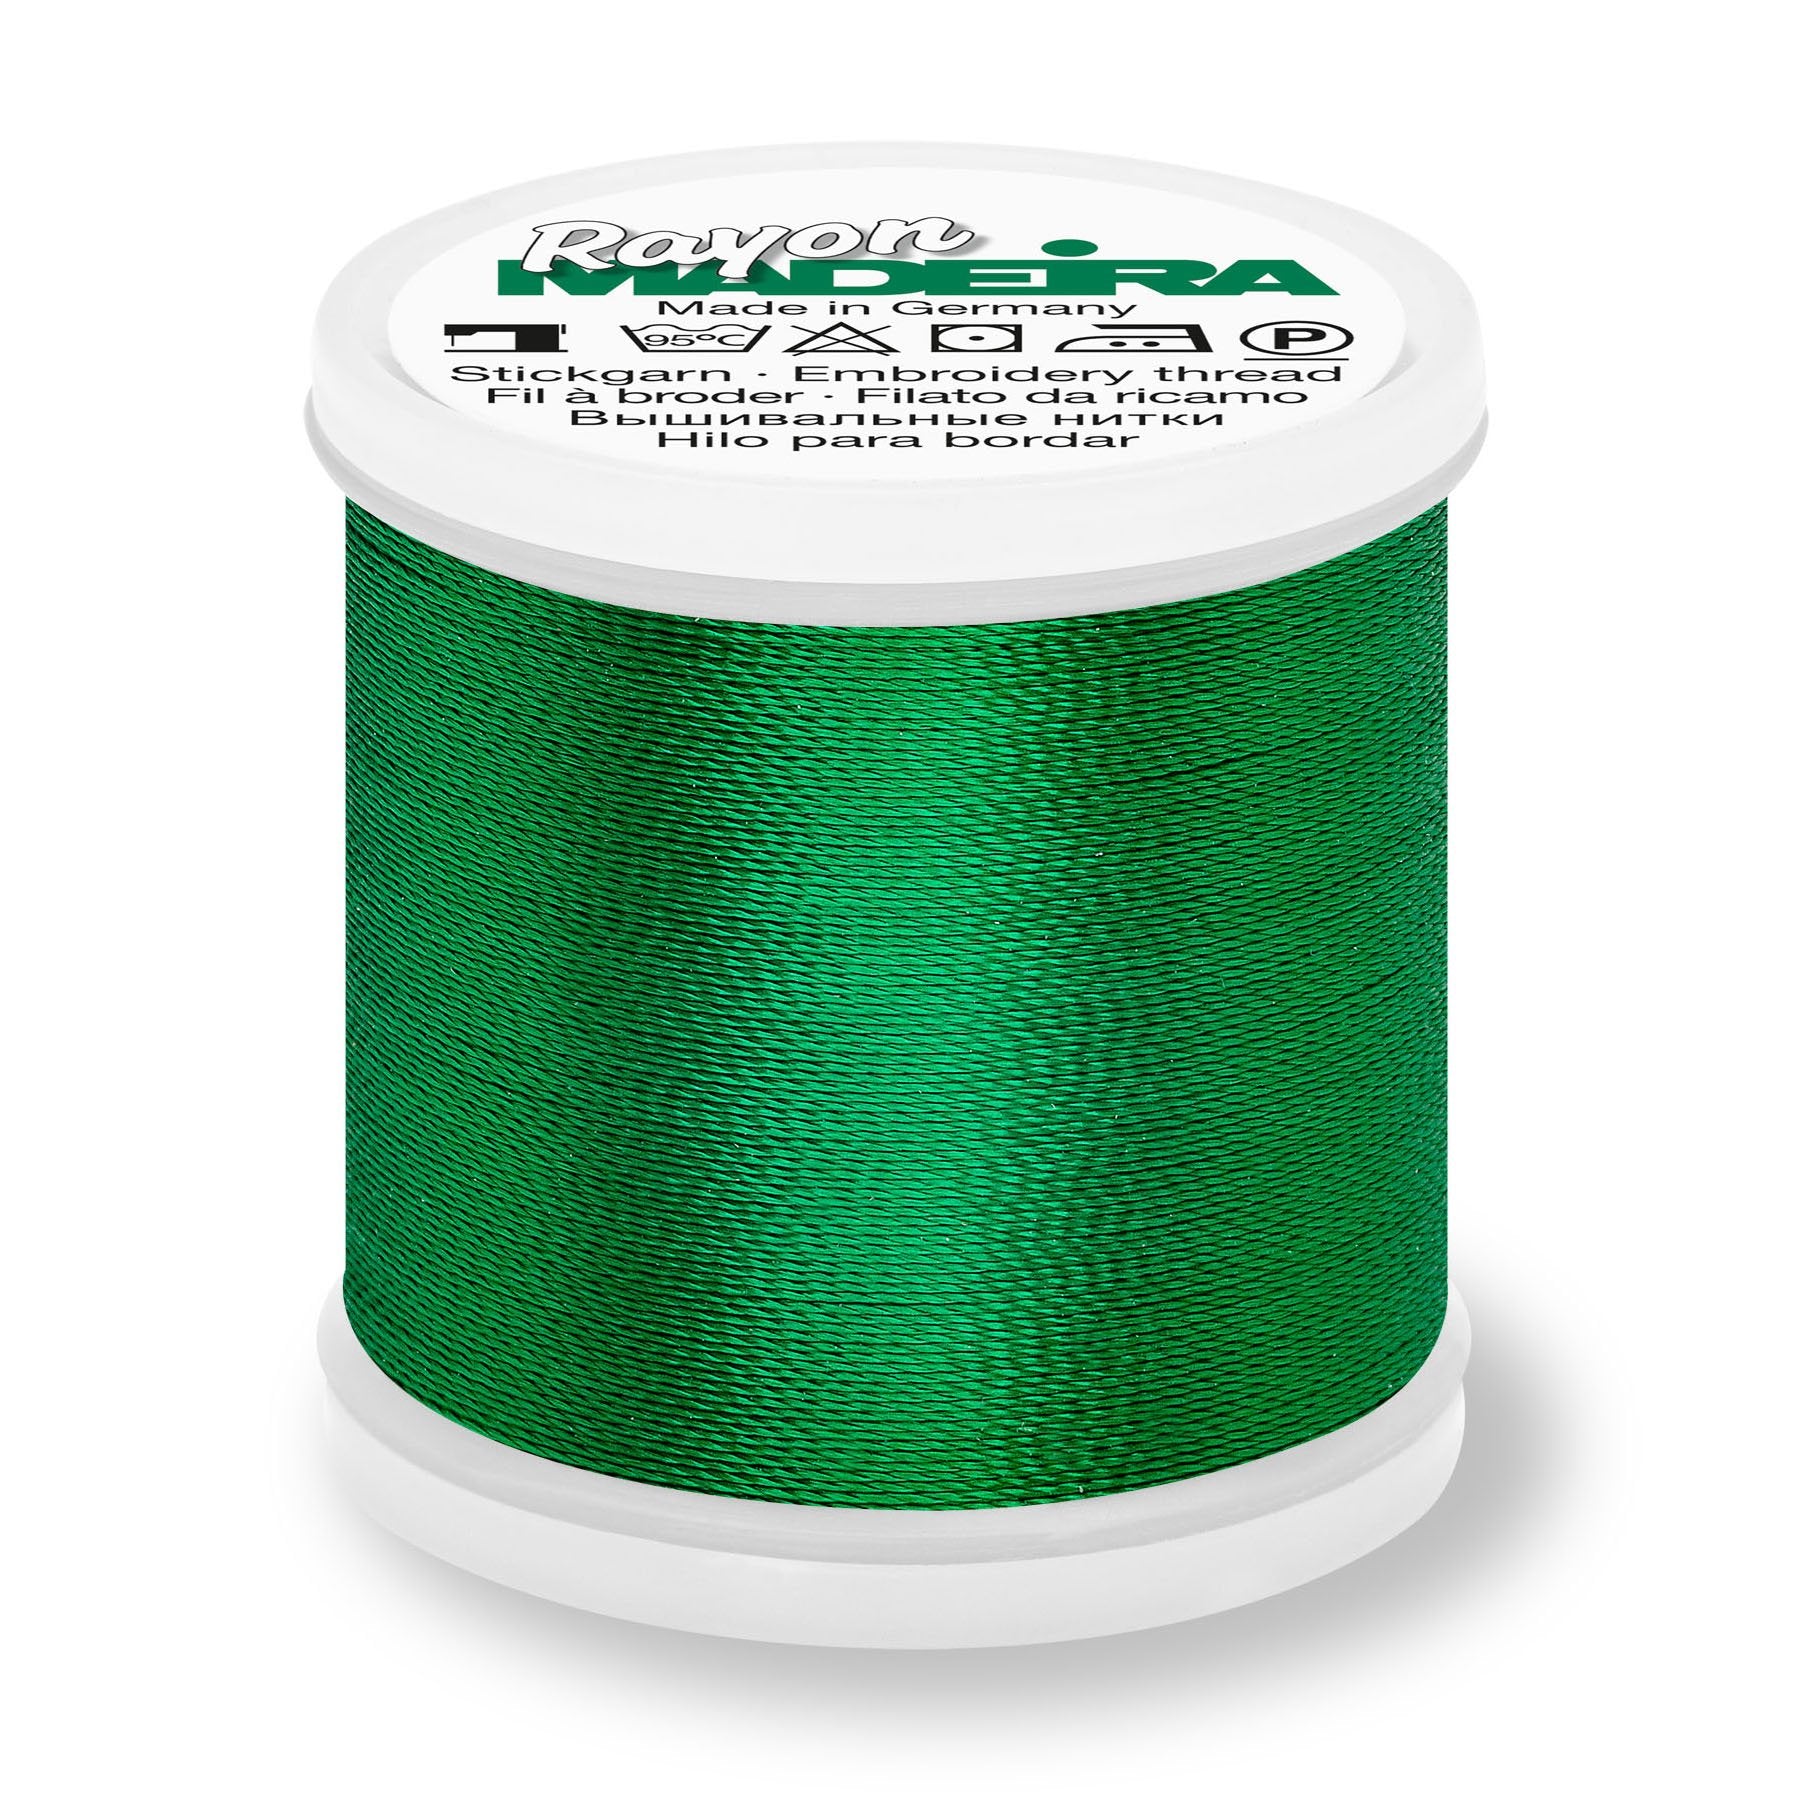 Madeira Rayon 40 Embroidery Thread 200m #1304 Forest Green from Jaycotts Sewing Supplies